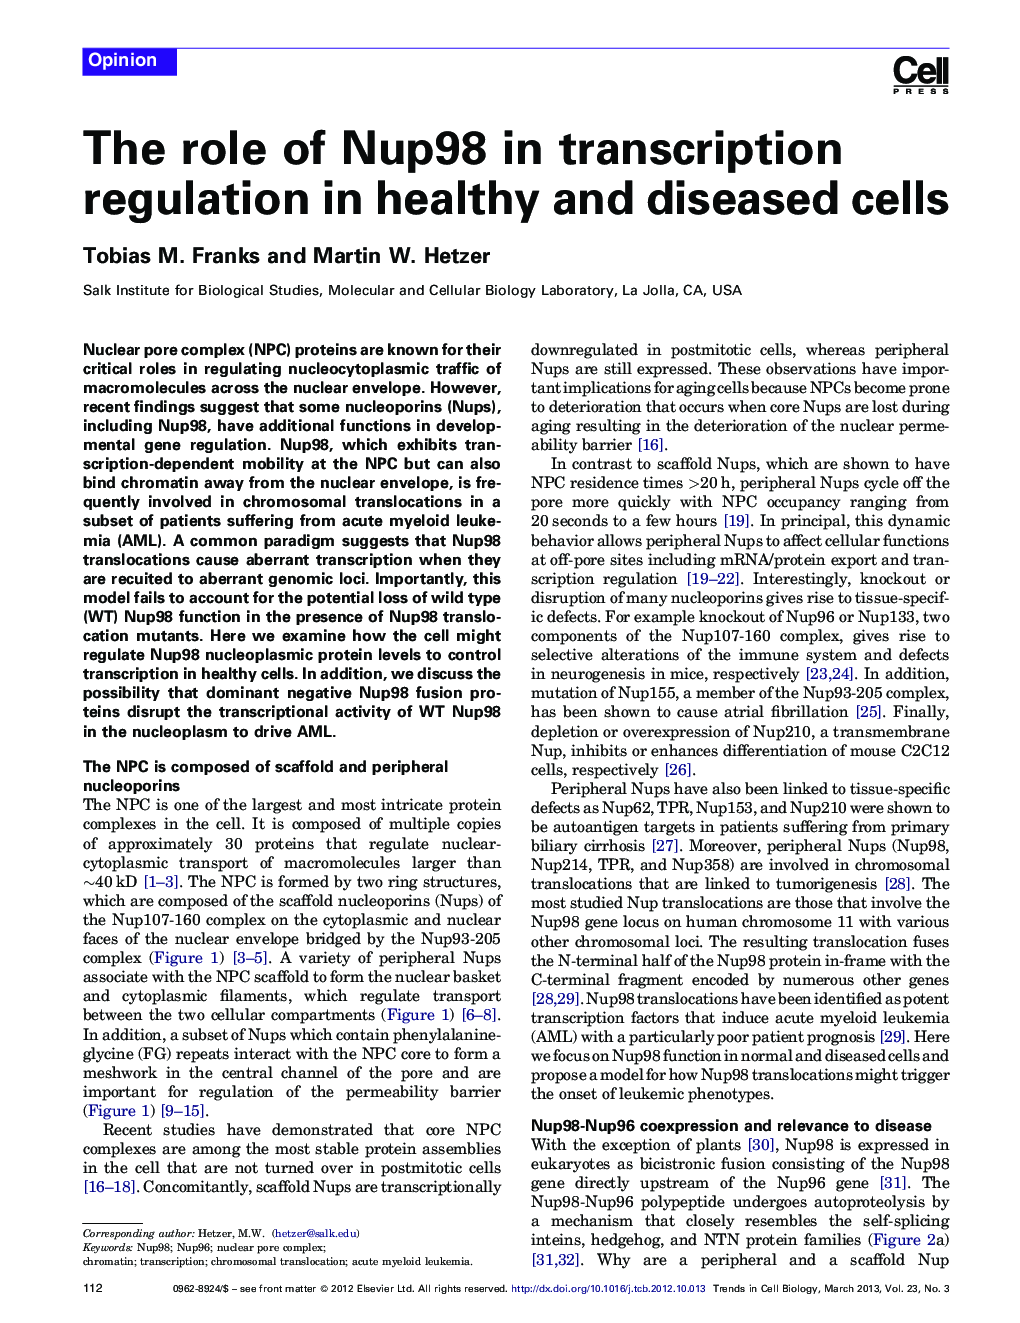 The role of Nup98 in transcription regulation in healthy and diseased cells